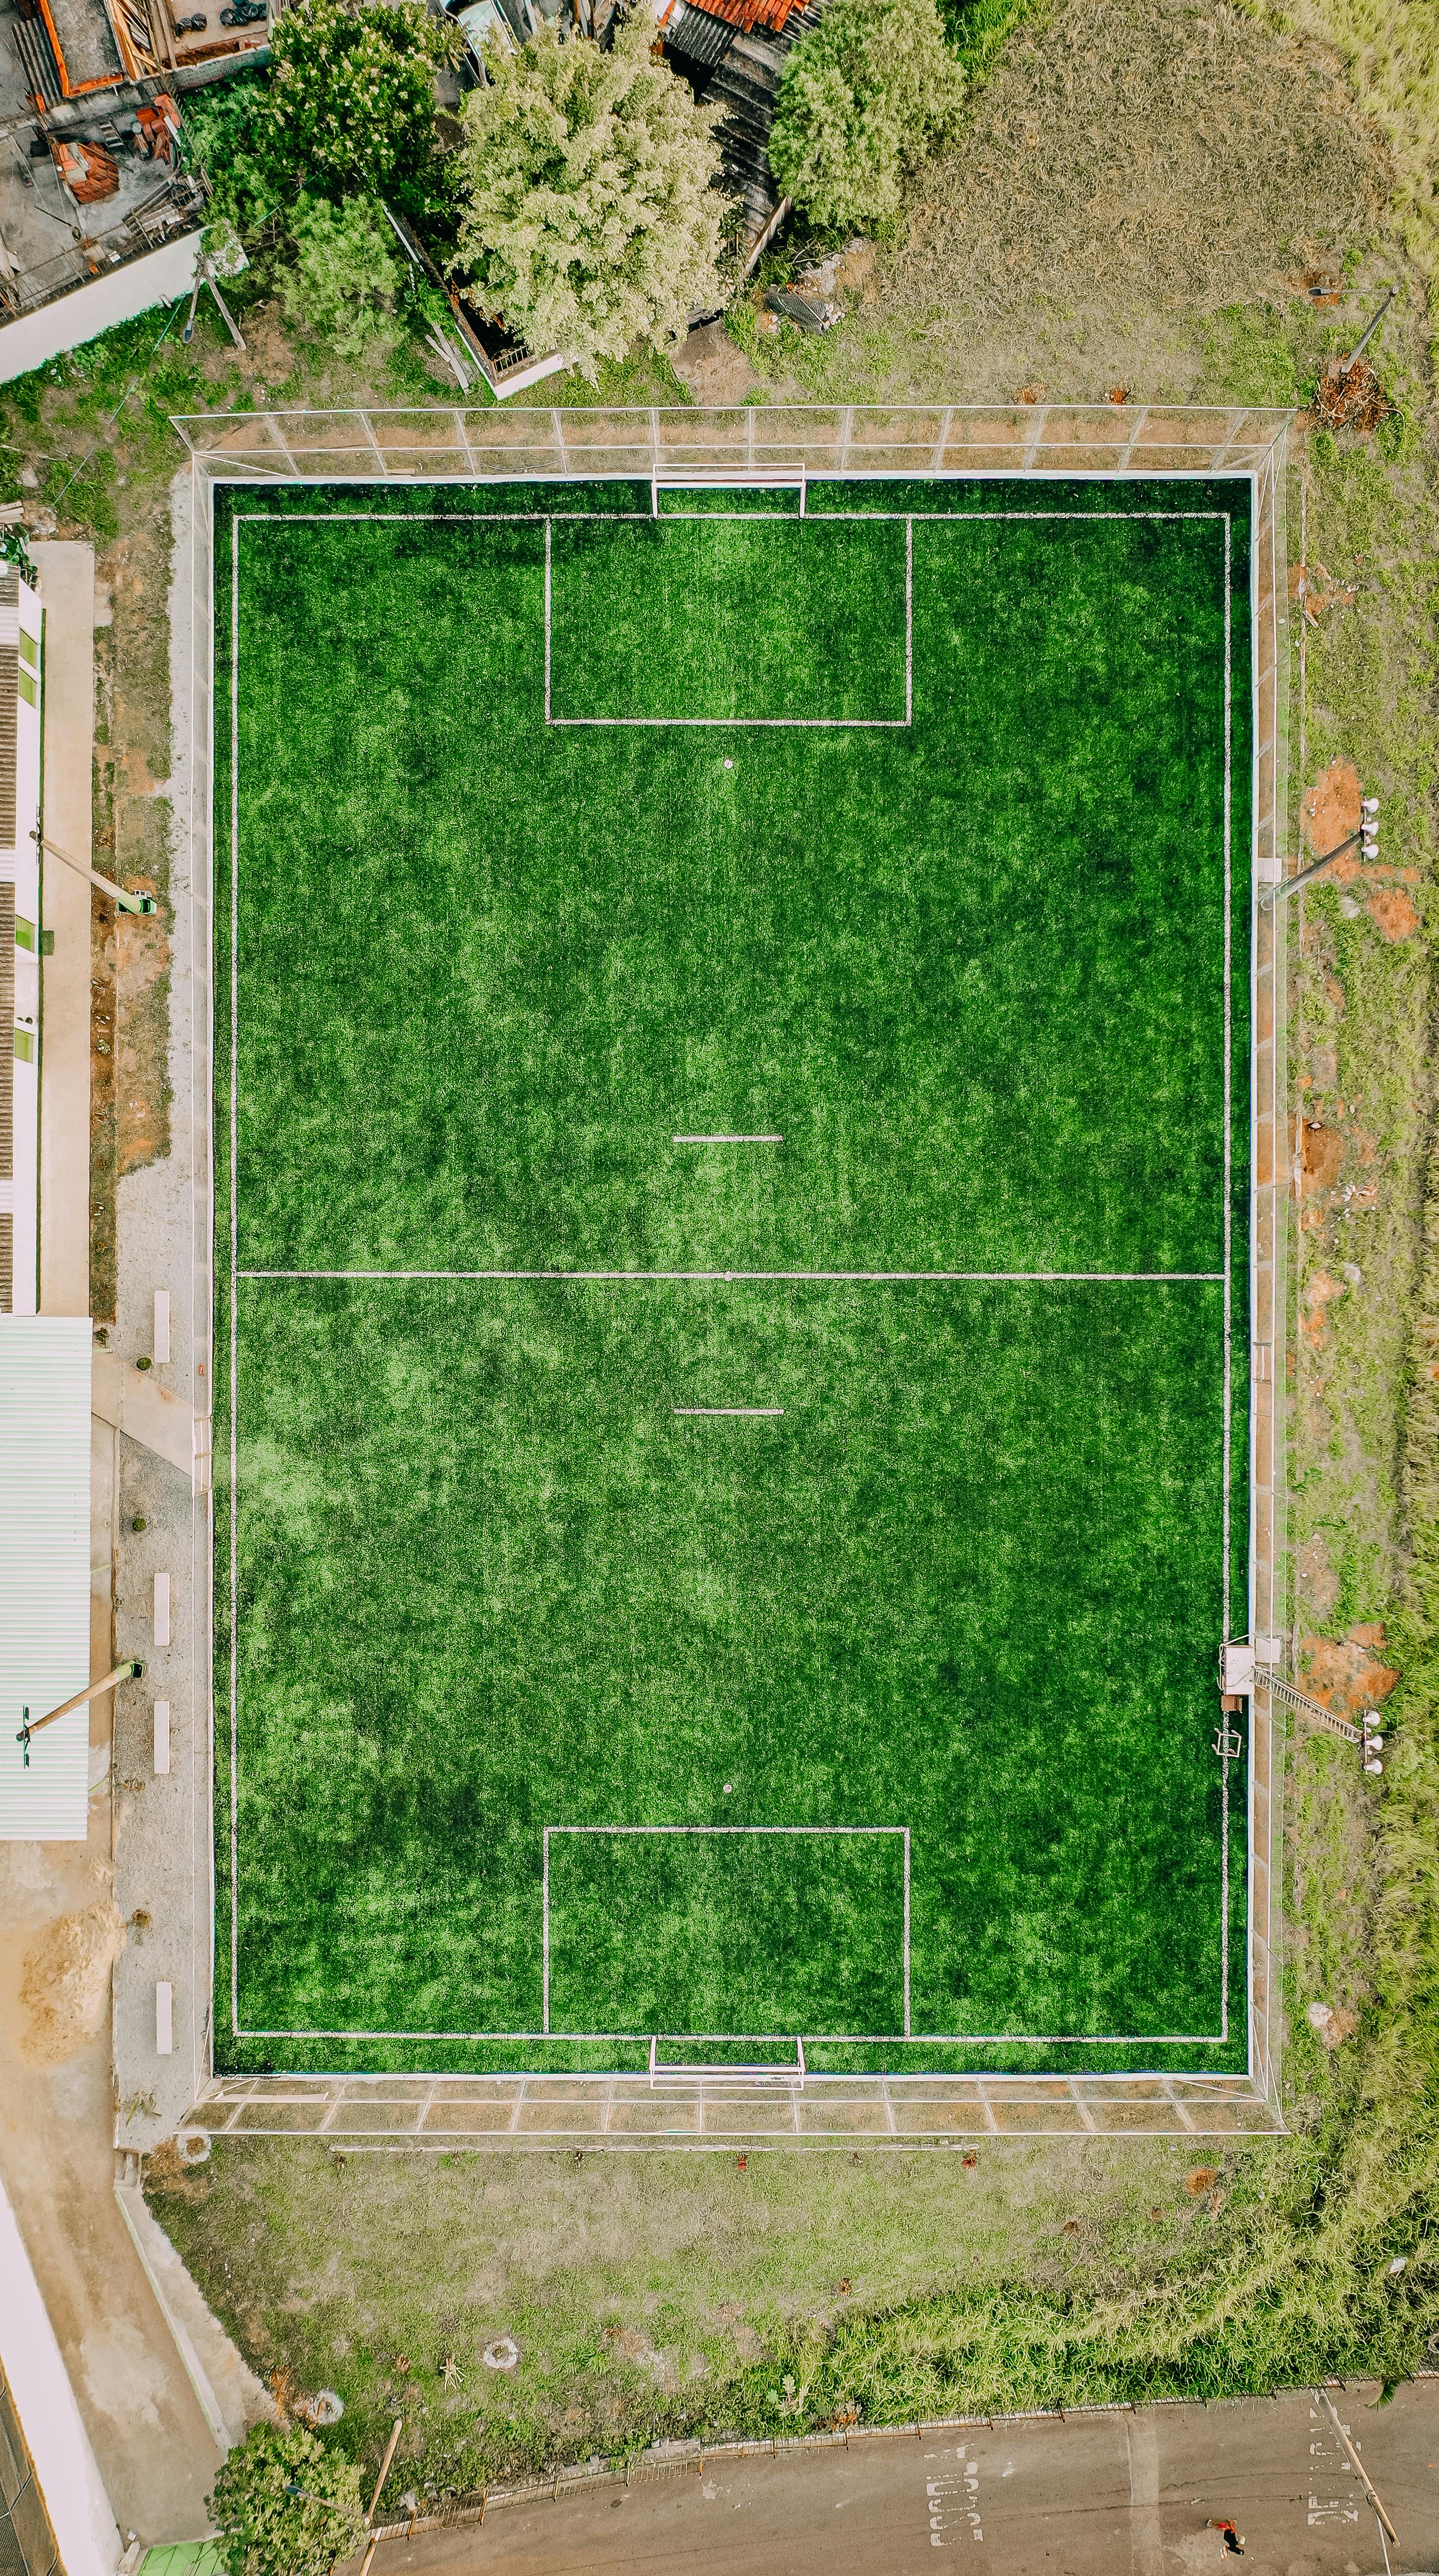 empty sport court surrounded by green grass